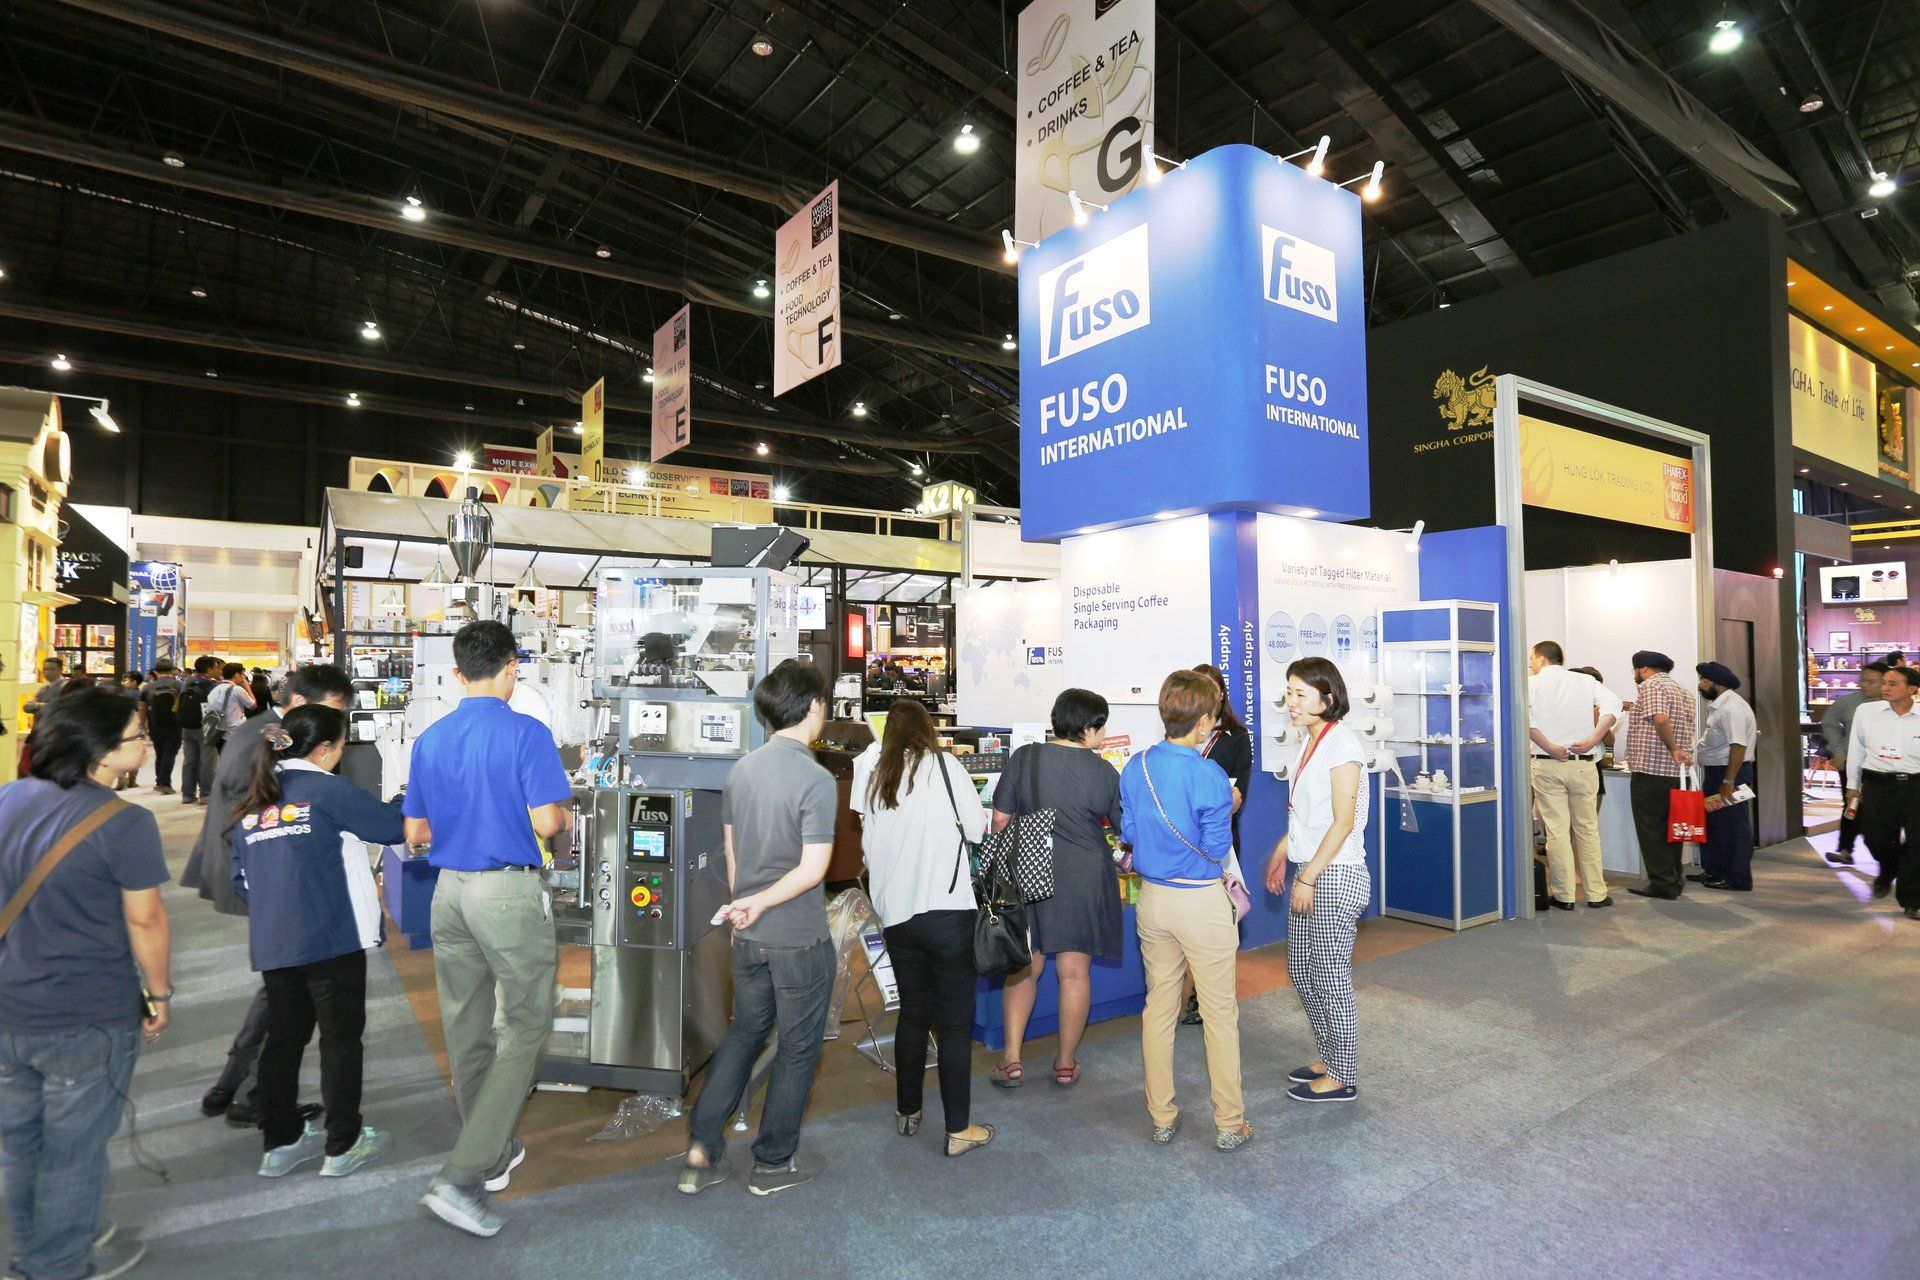 Fuso International @ Thaifex 2015. Booth designed and built by Essential Global Fairs.